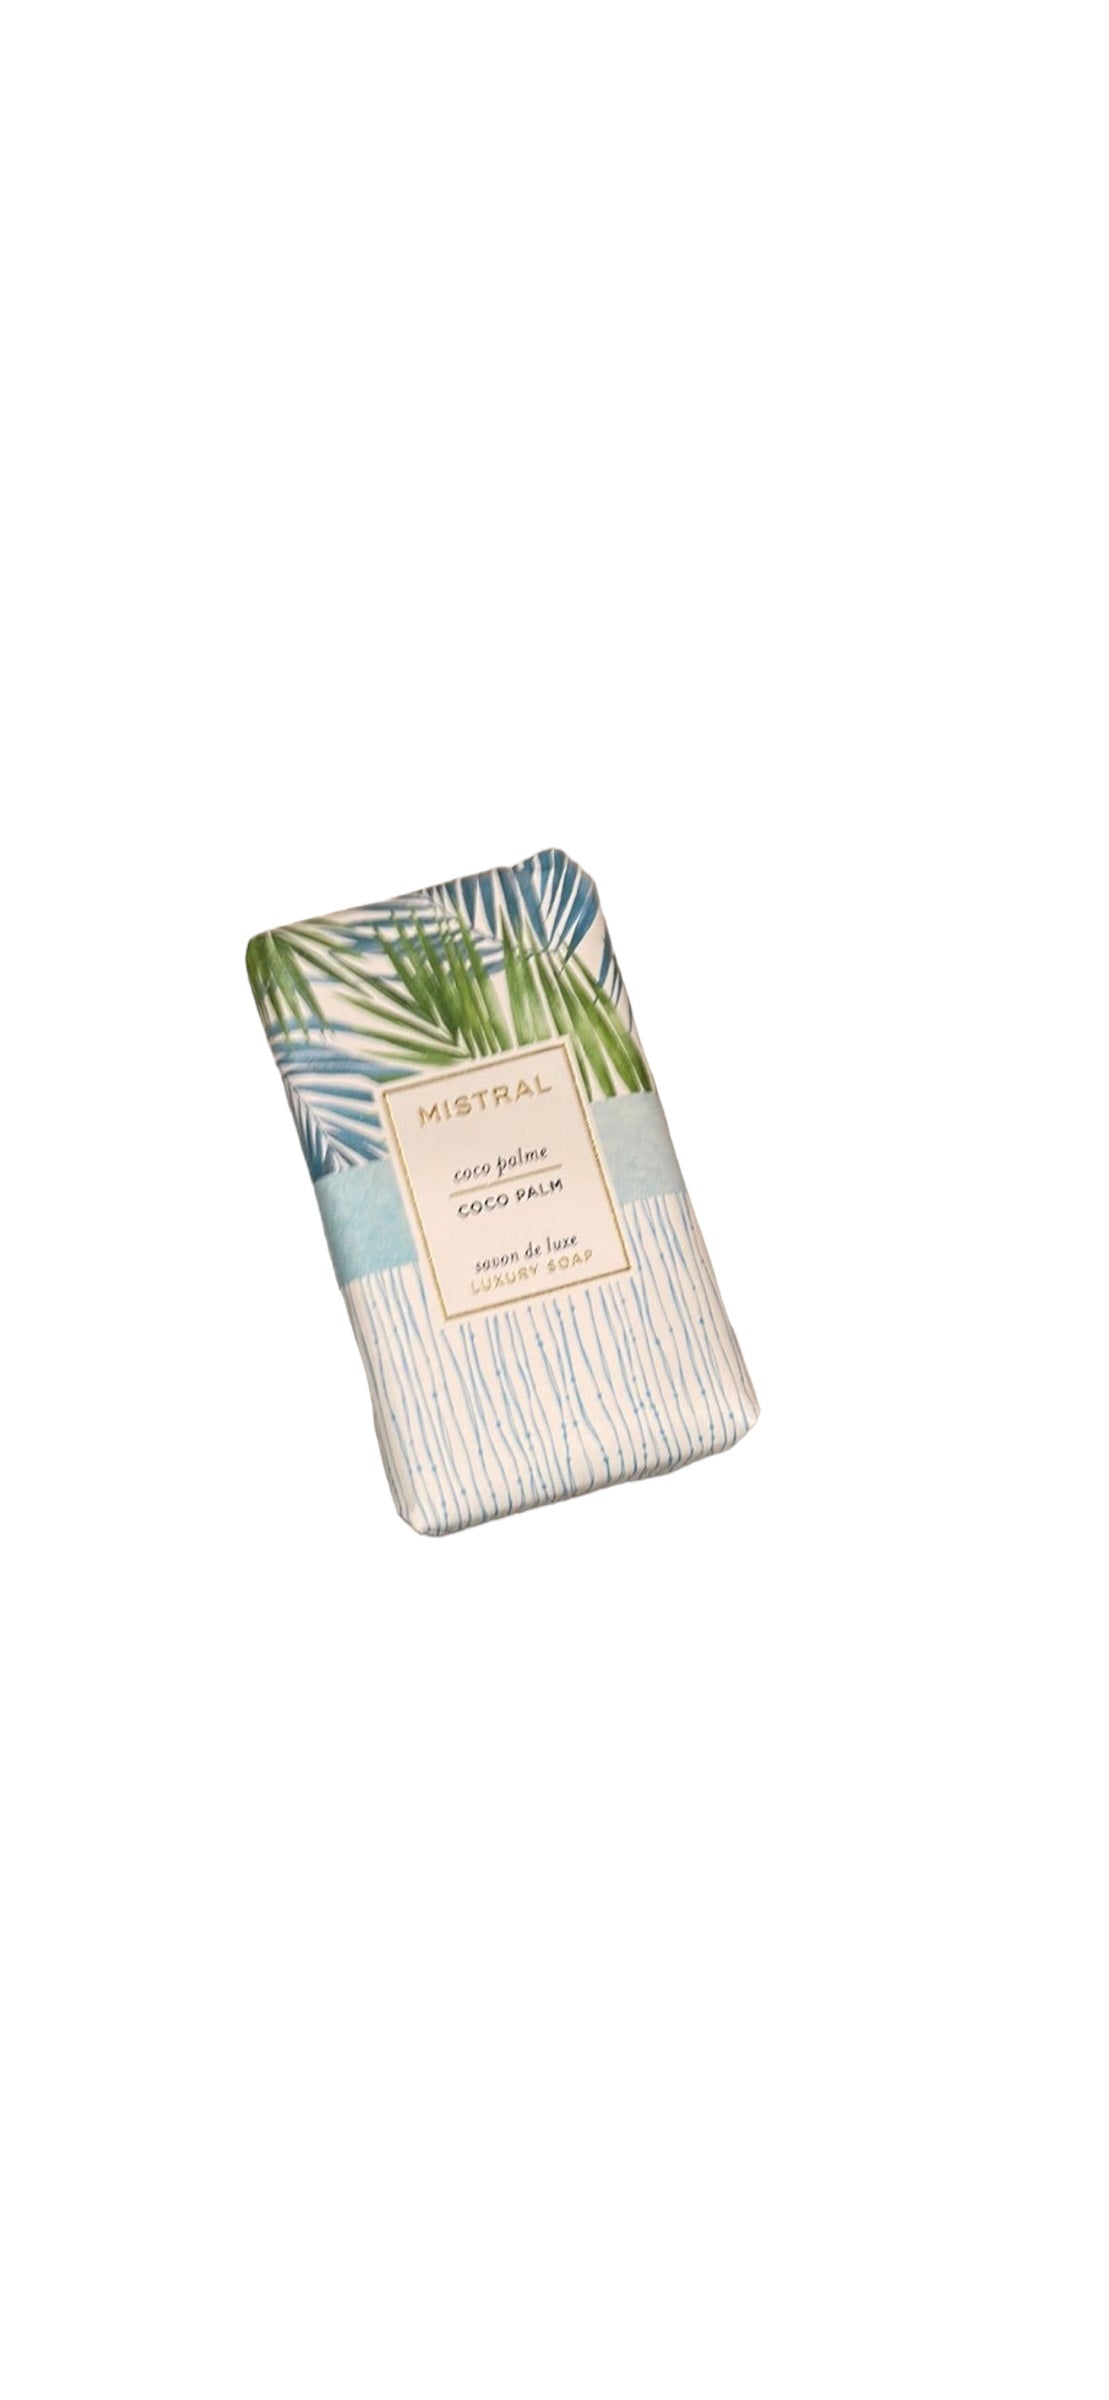 Coco Palm Bar Soap by Mistral